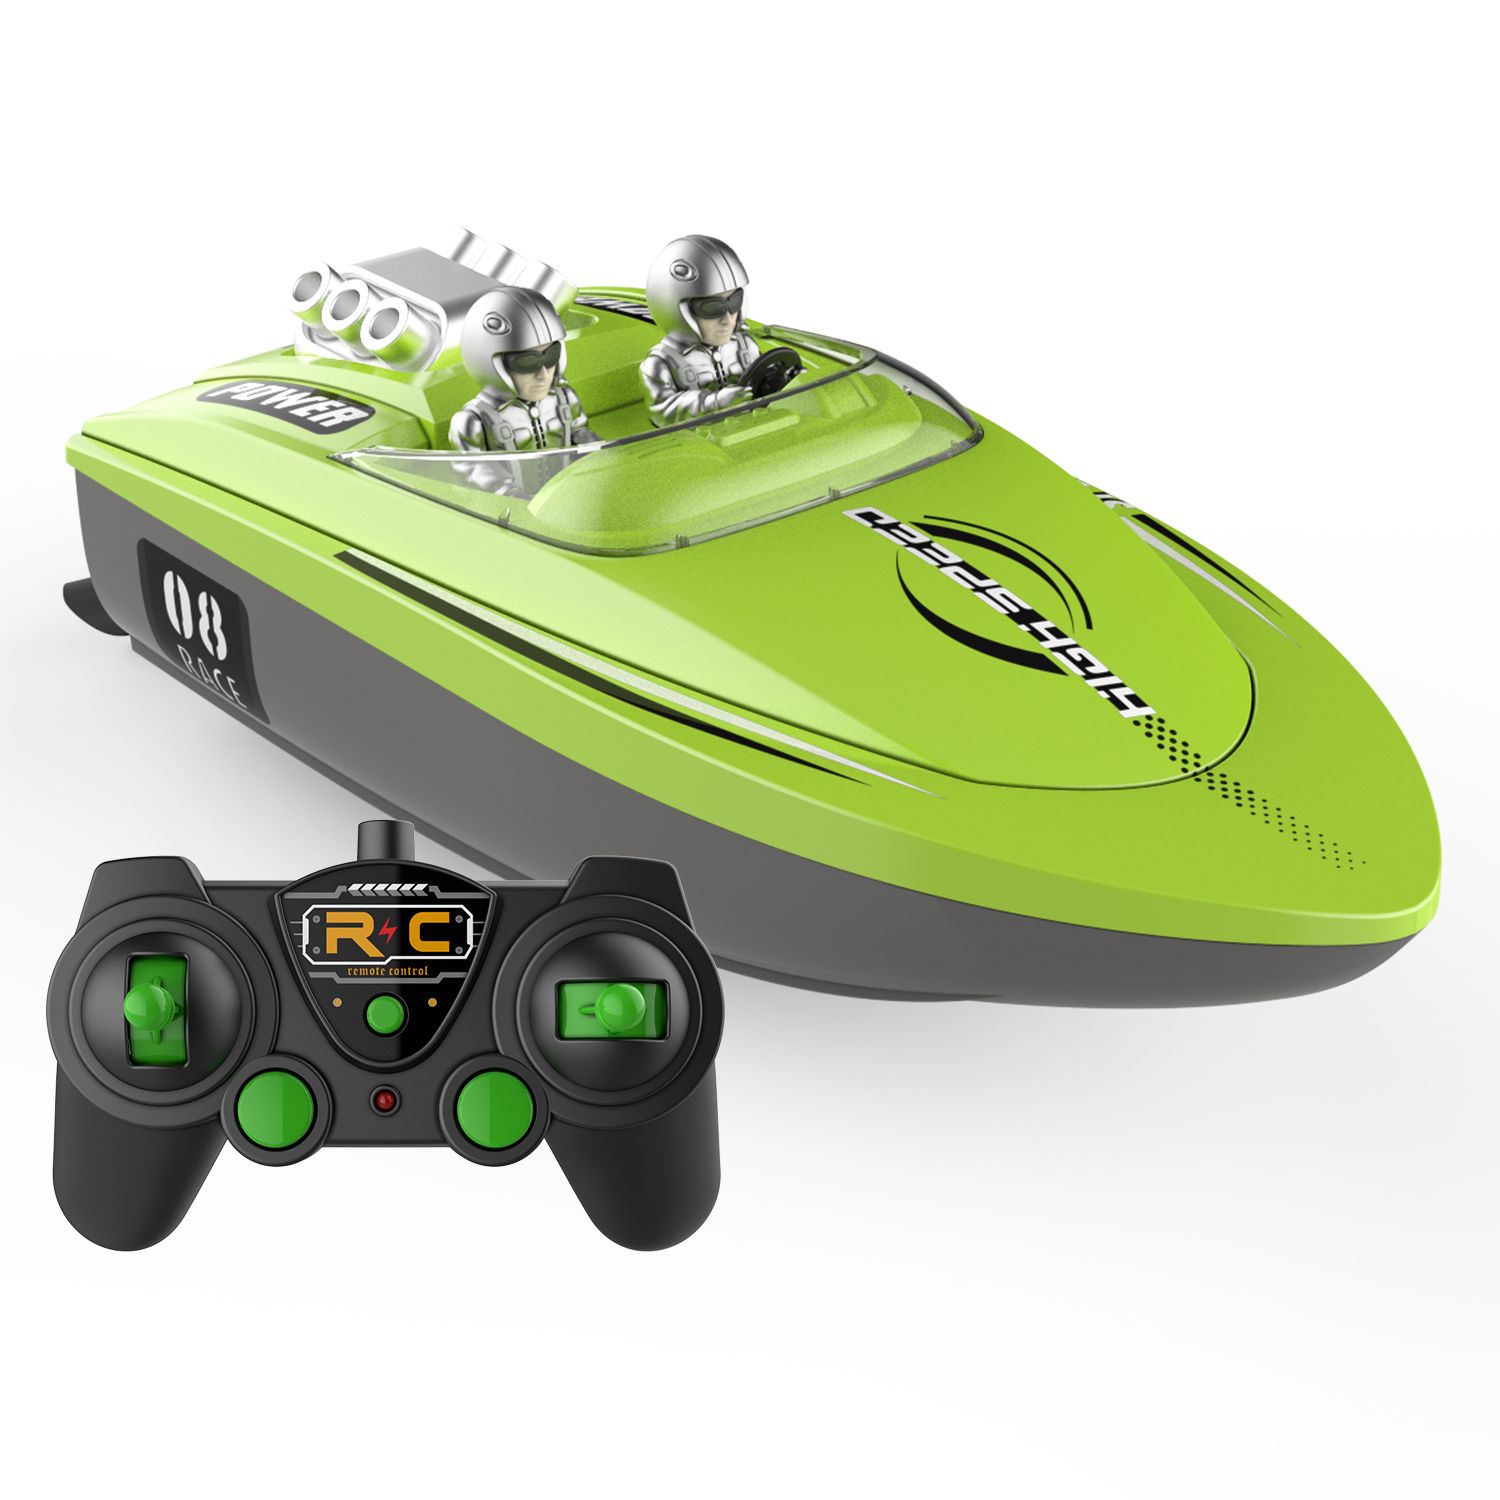 Customized Waterproof High Speed Jumping Boat Cool Water Wireless RC Racing Boat Toys For Kids Gift